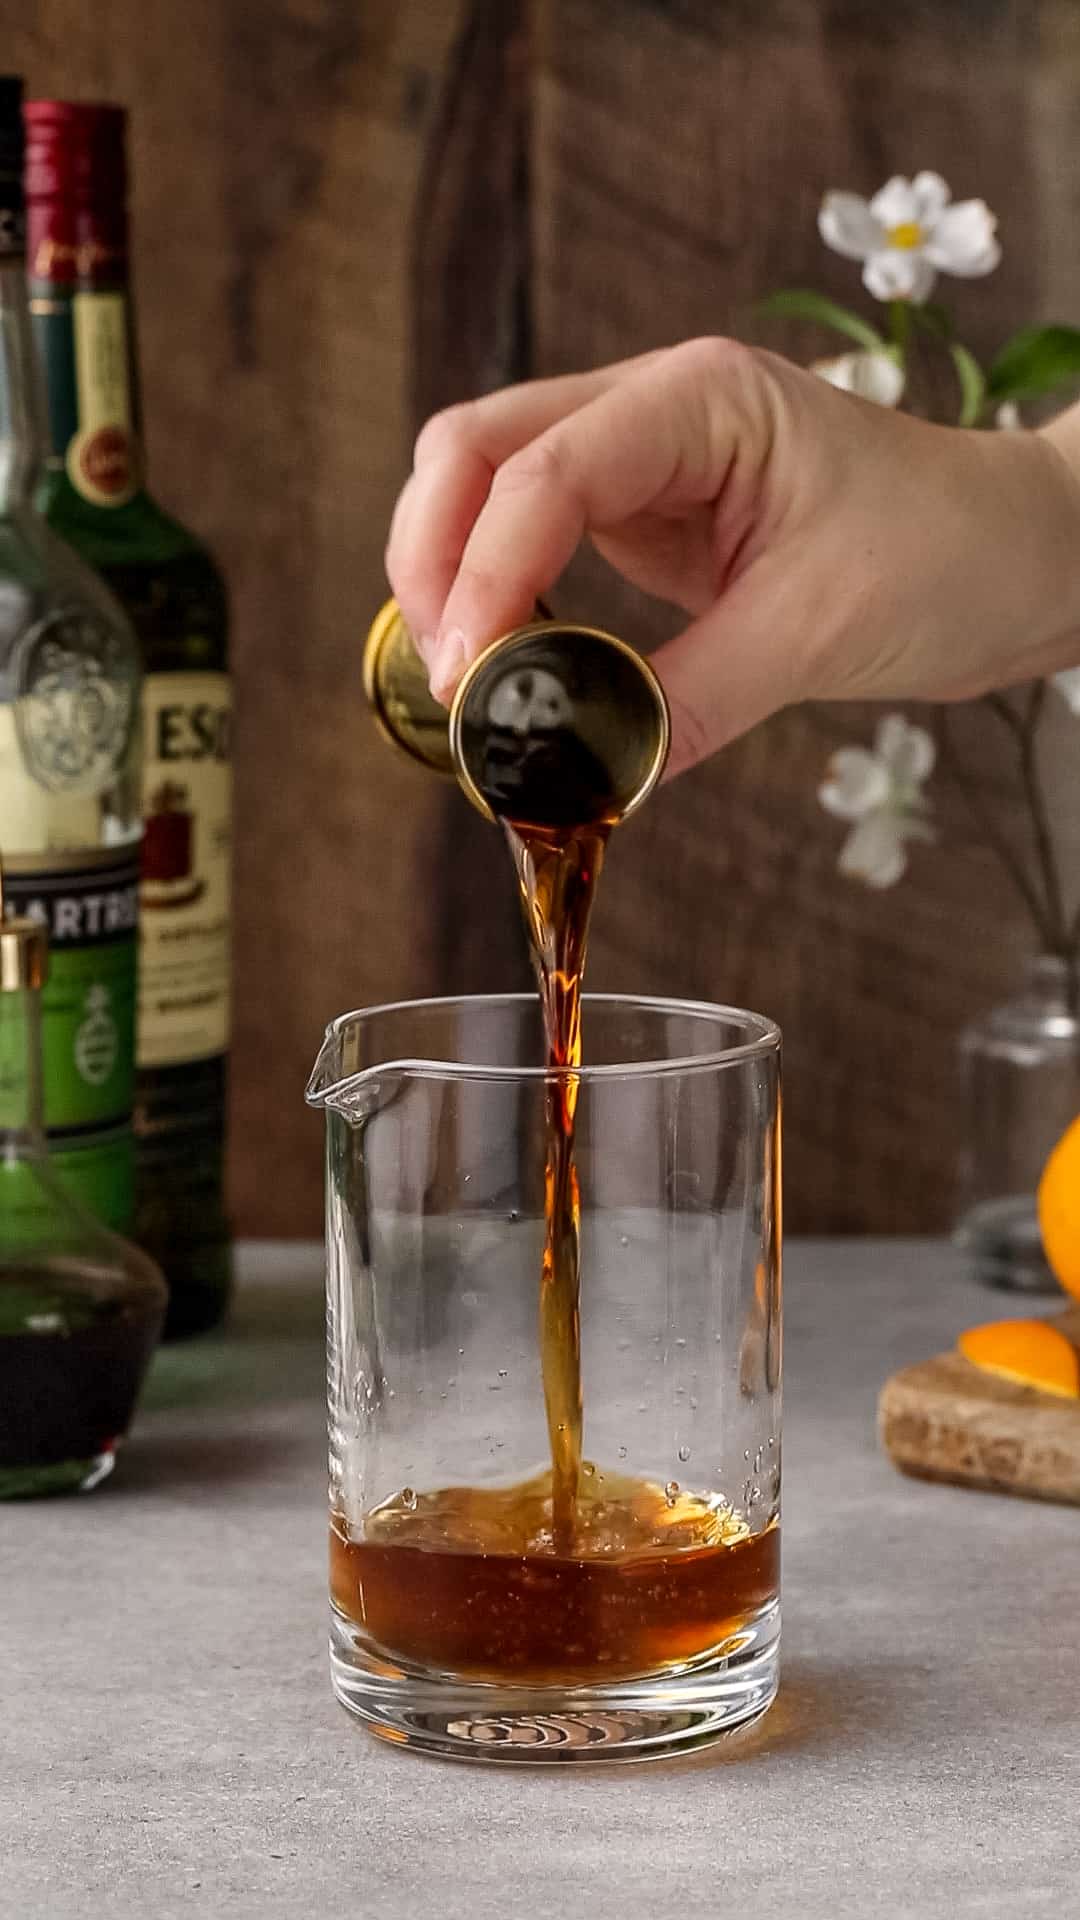 Vermouth is added to the mixing glass.